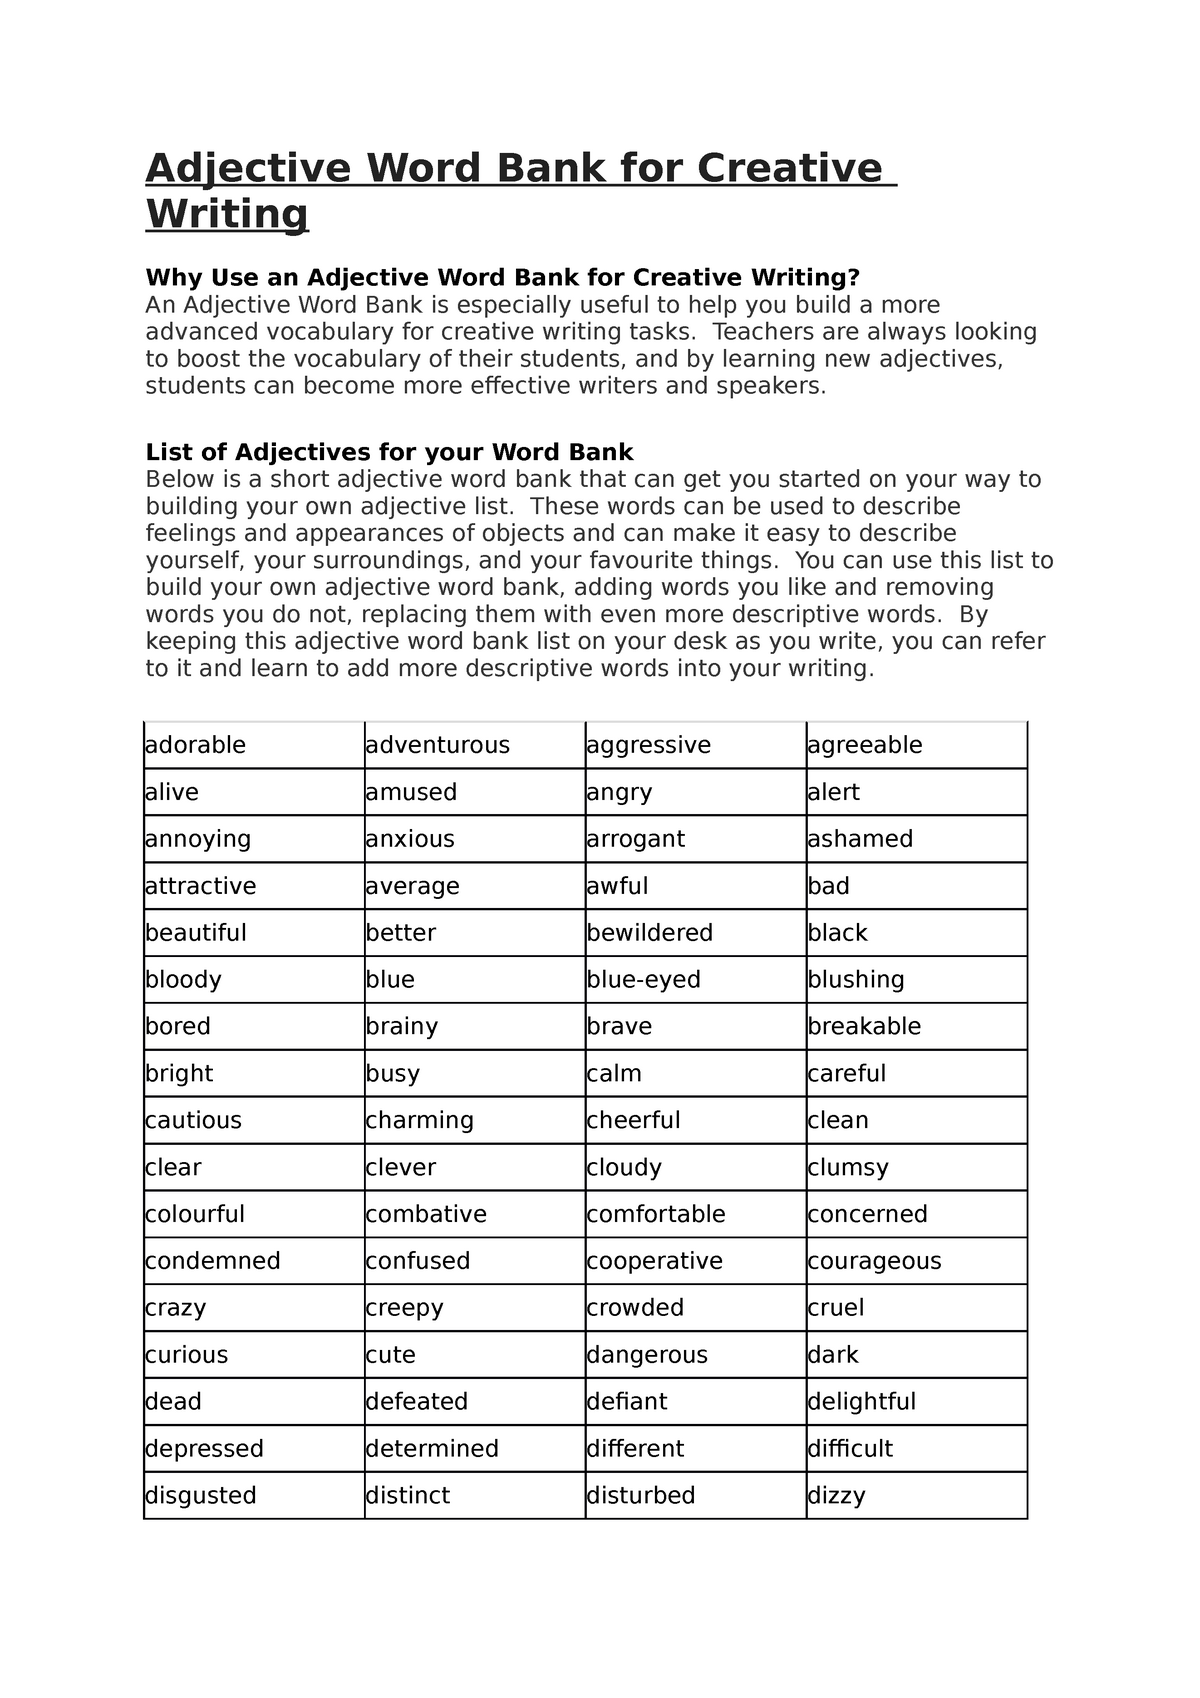 adjectives for creative writing